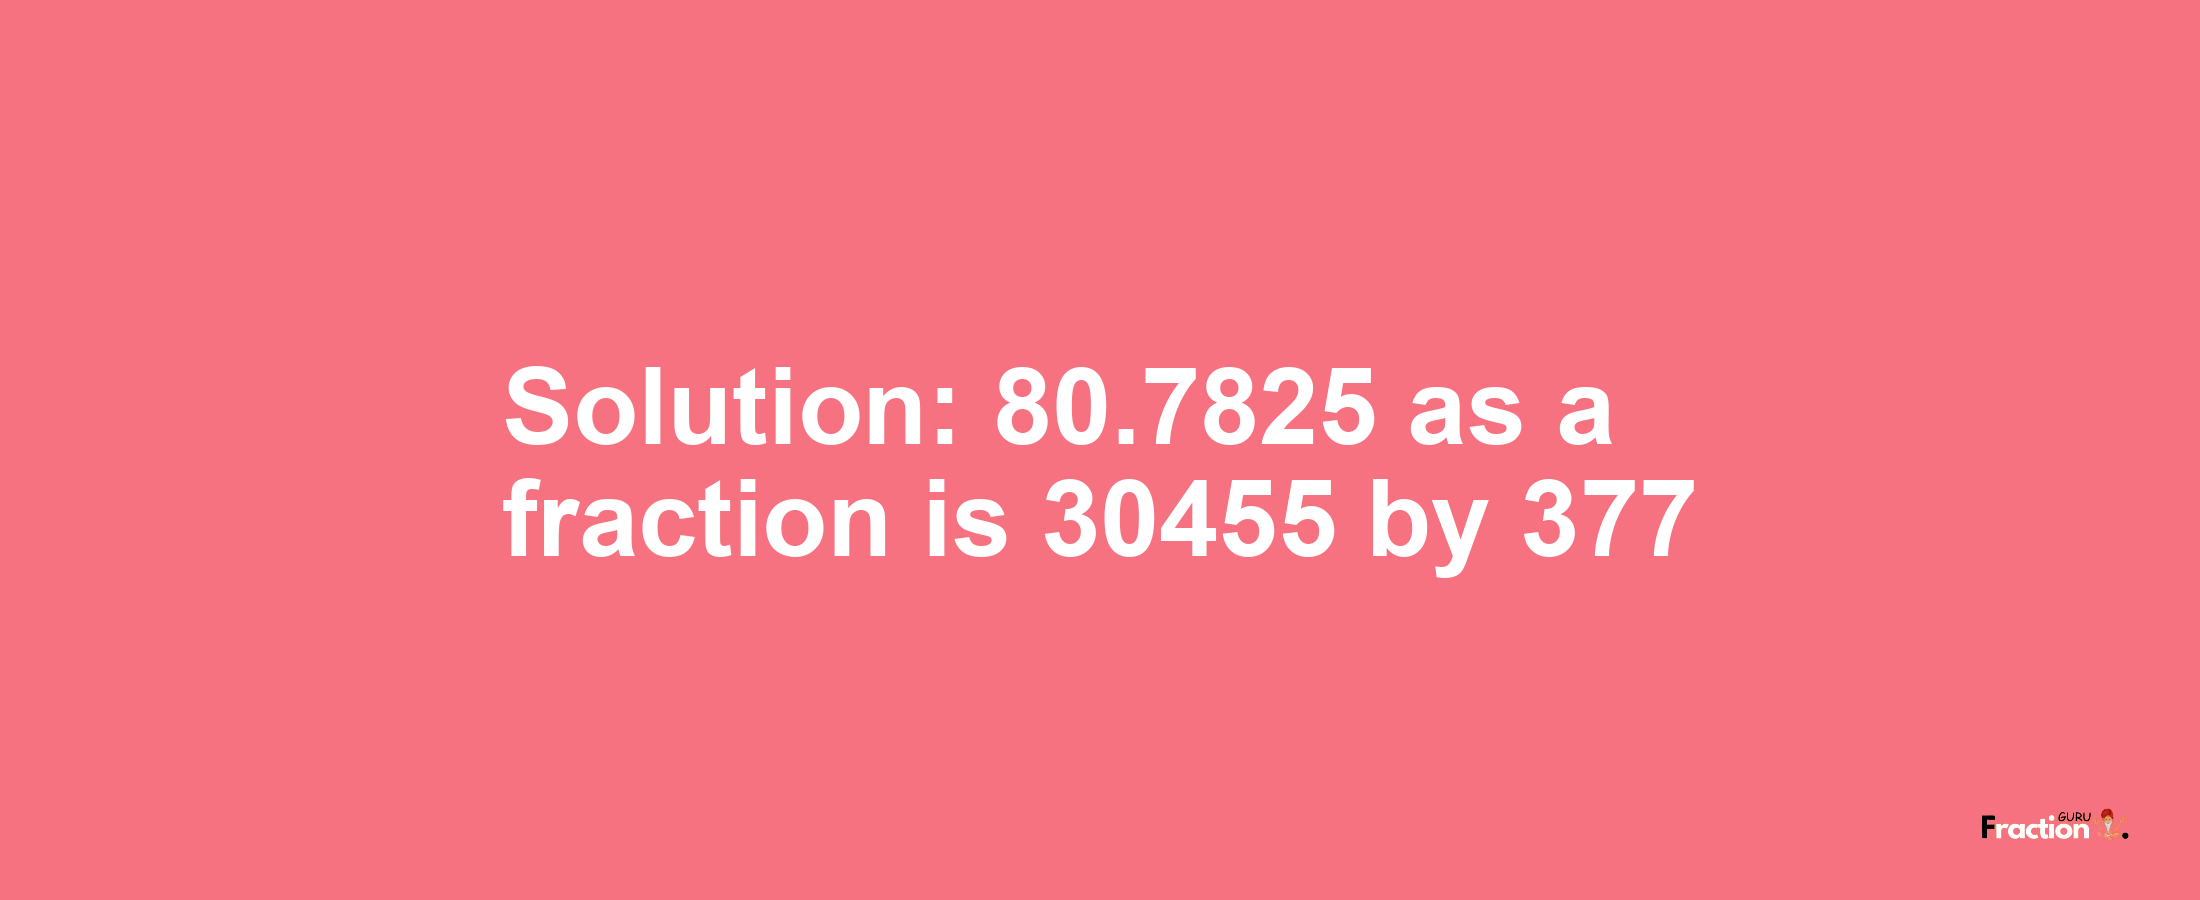 Solution:80.7825 as a fraction is 30455/377